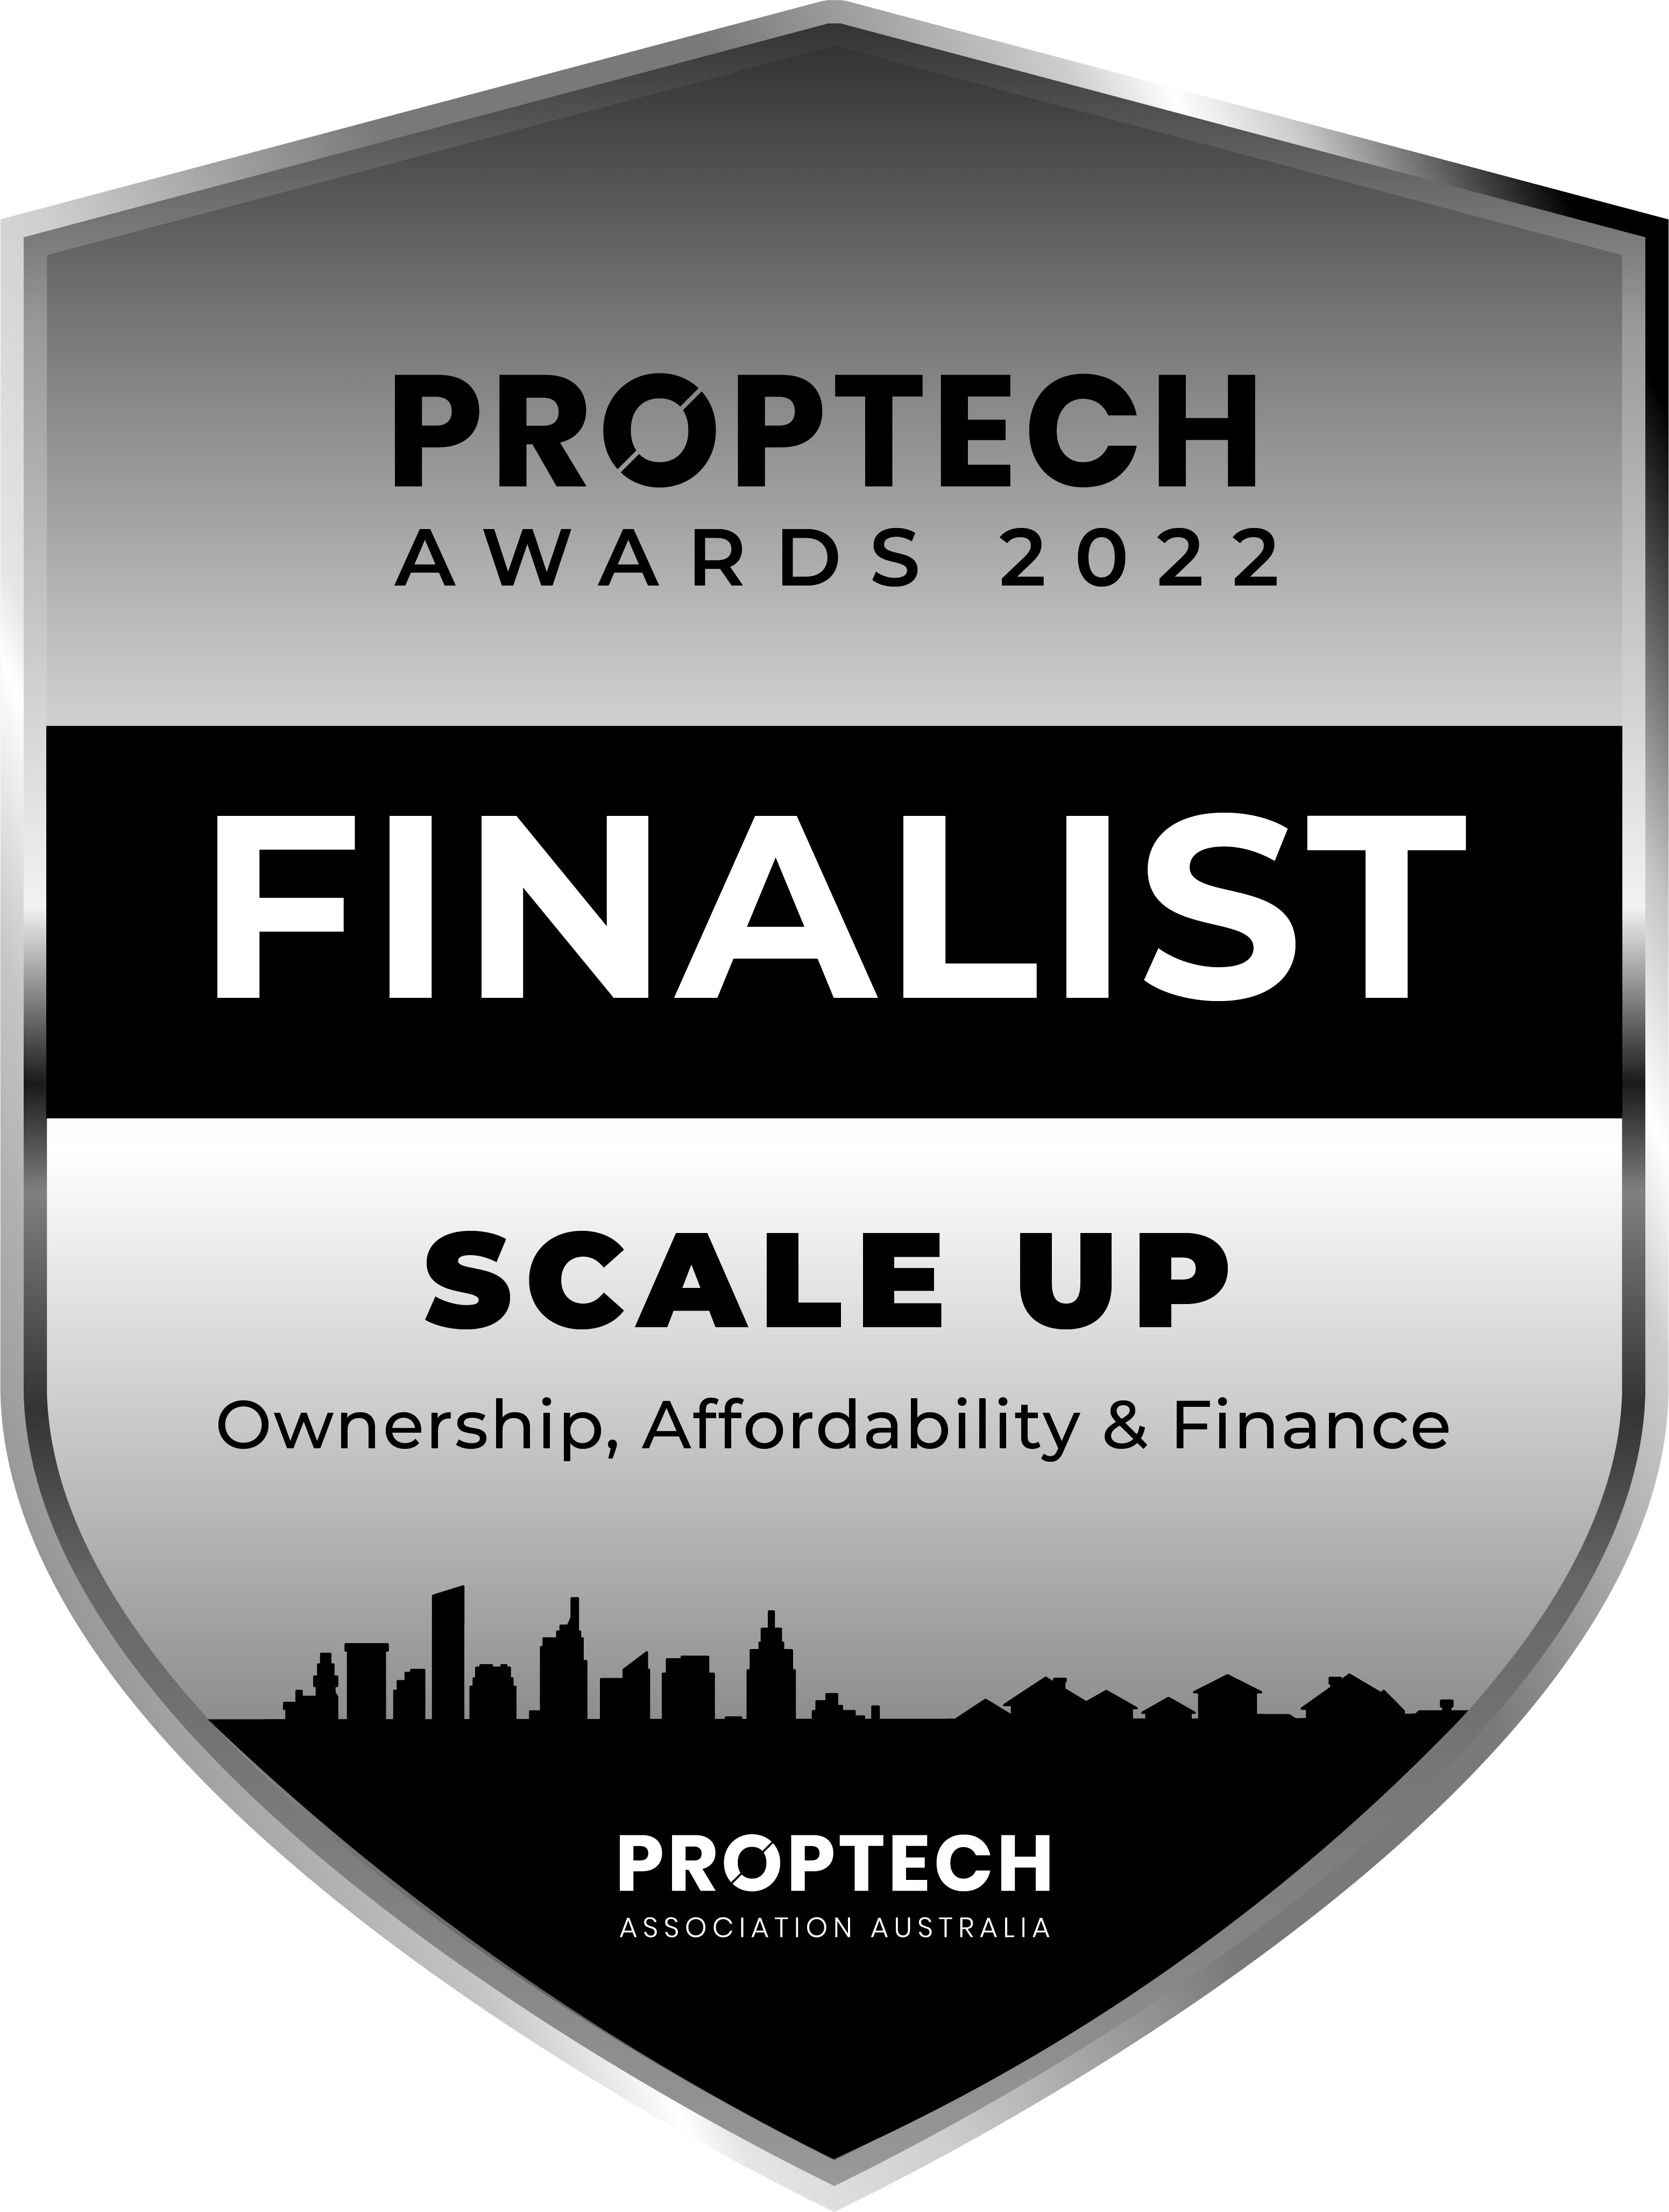 Proptech Awards 2022 Badge_SCALE UP_Ownership, Affordability & Finance